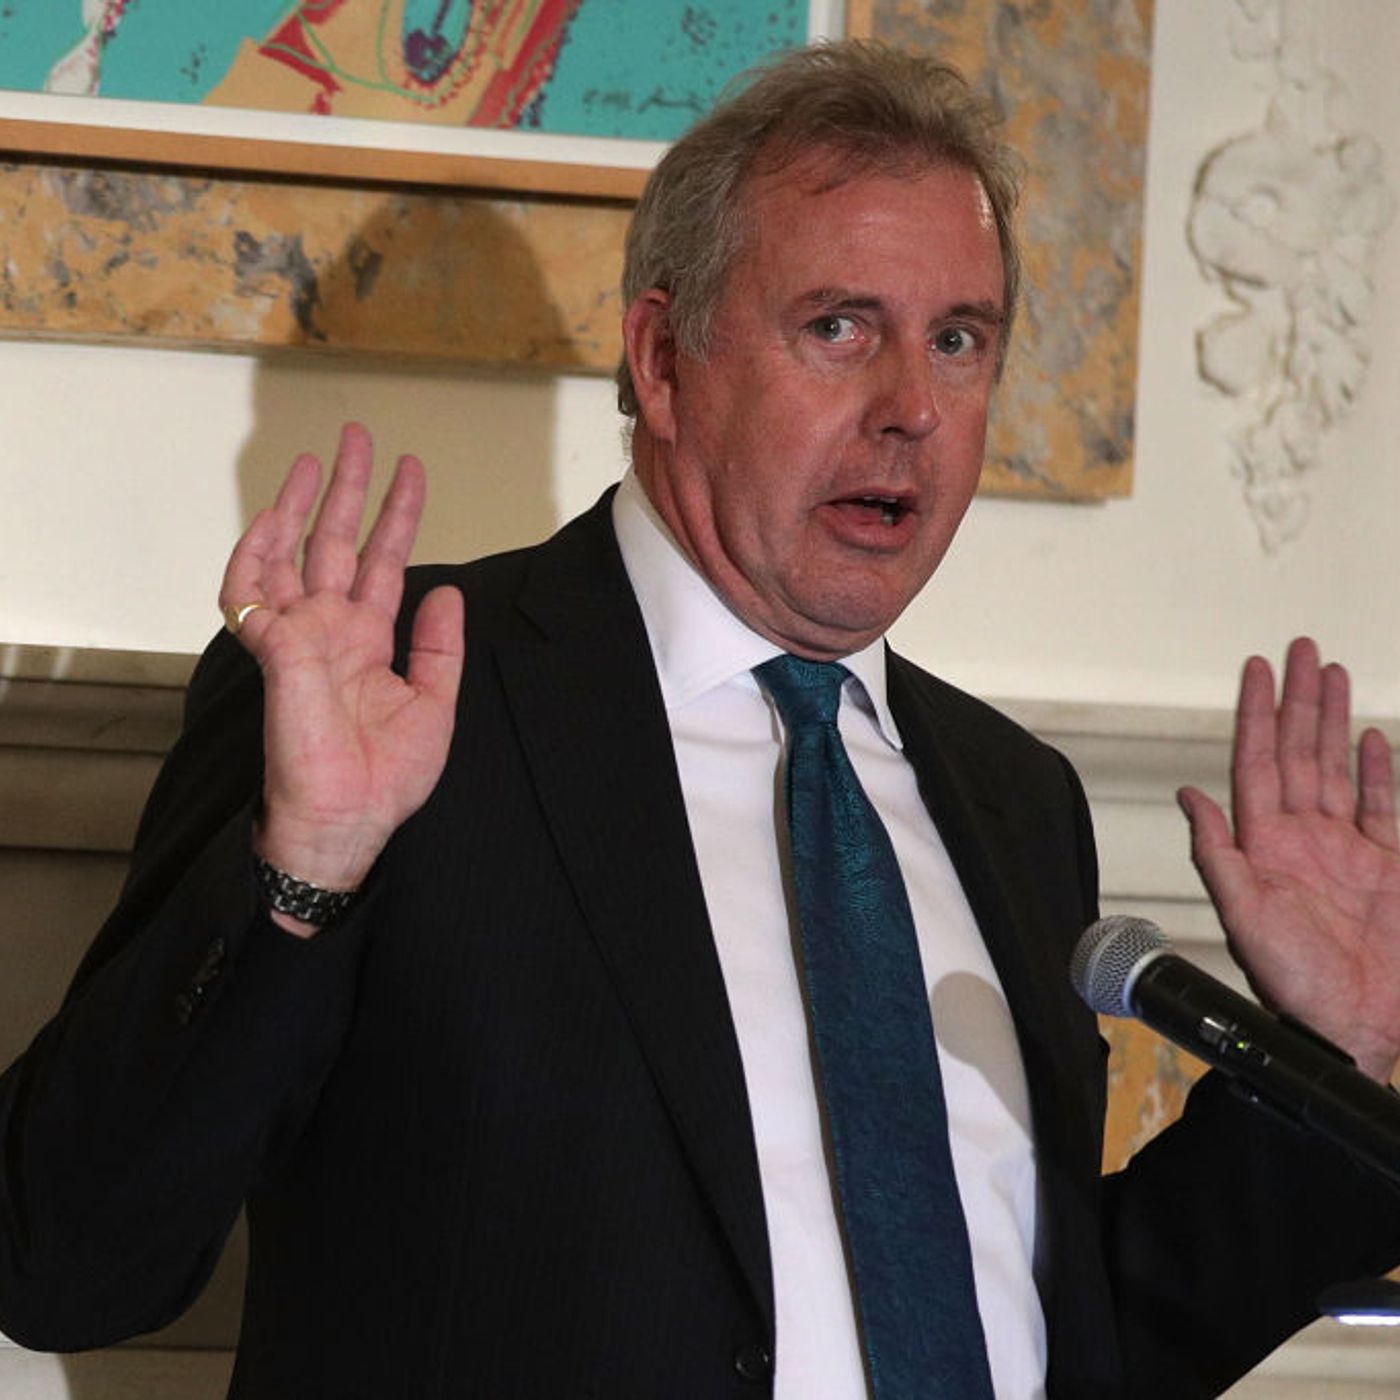 What happened to Kim Darroch?